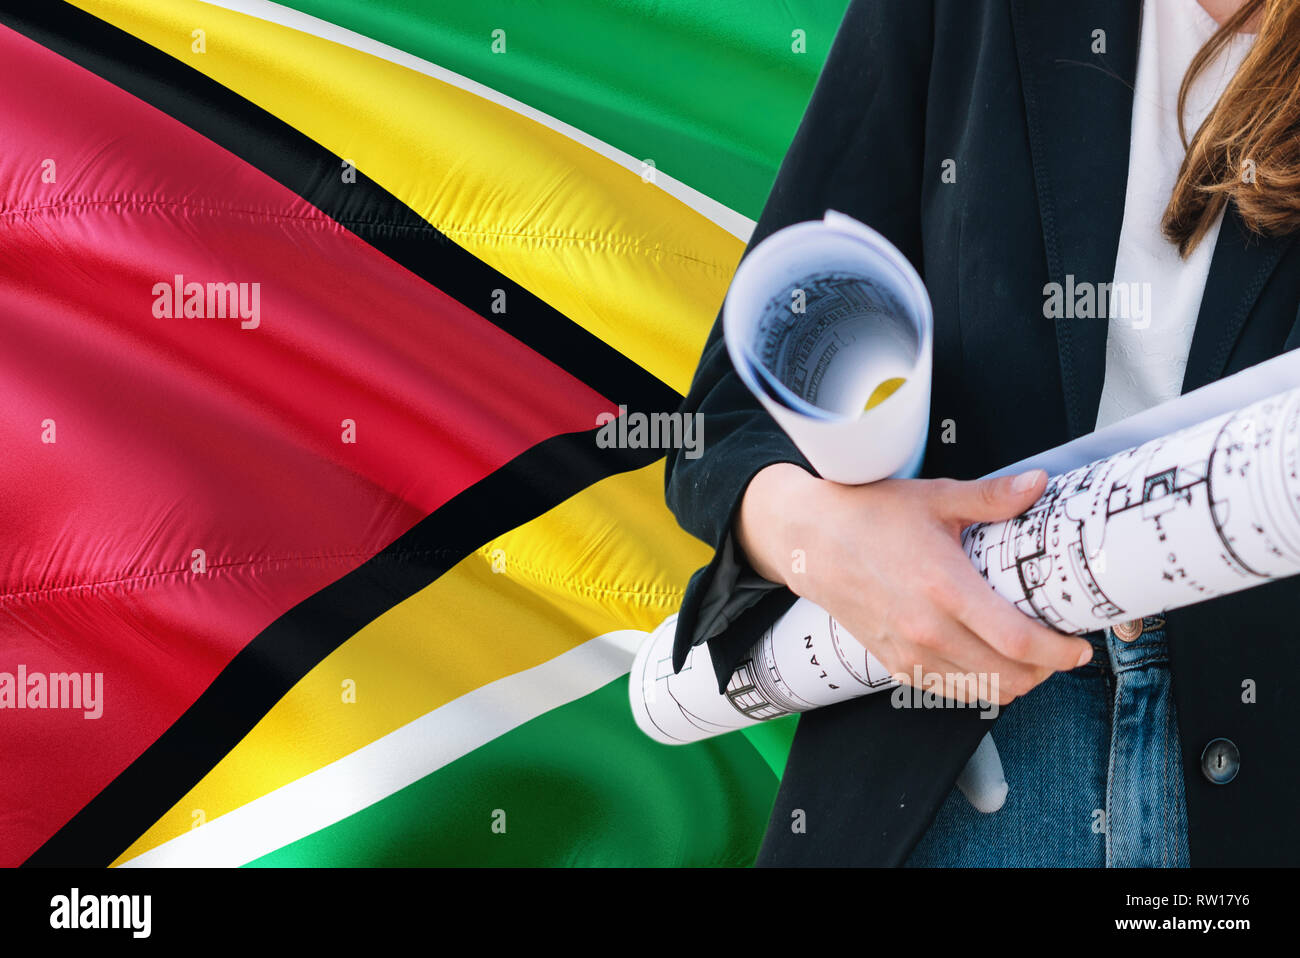 Guyanese Architect woman holding blueprint against Guyana waving flag background. Construction and architecture concept. Stock Photo